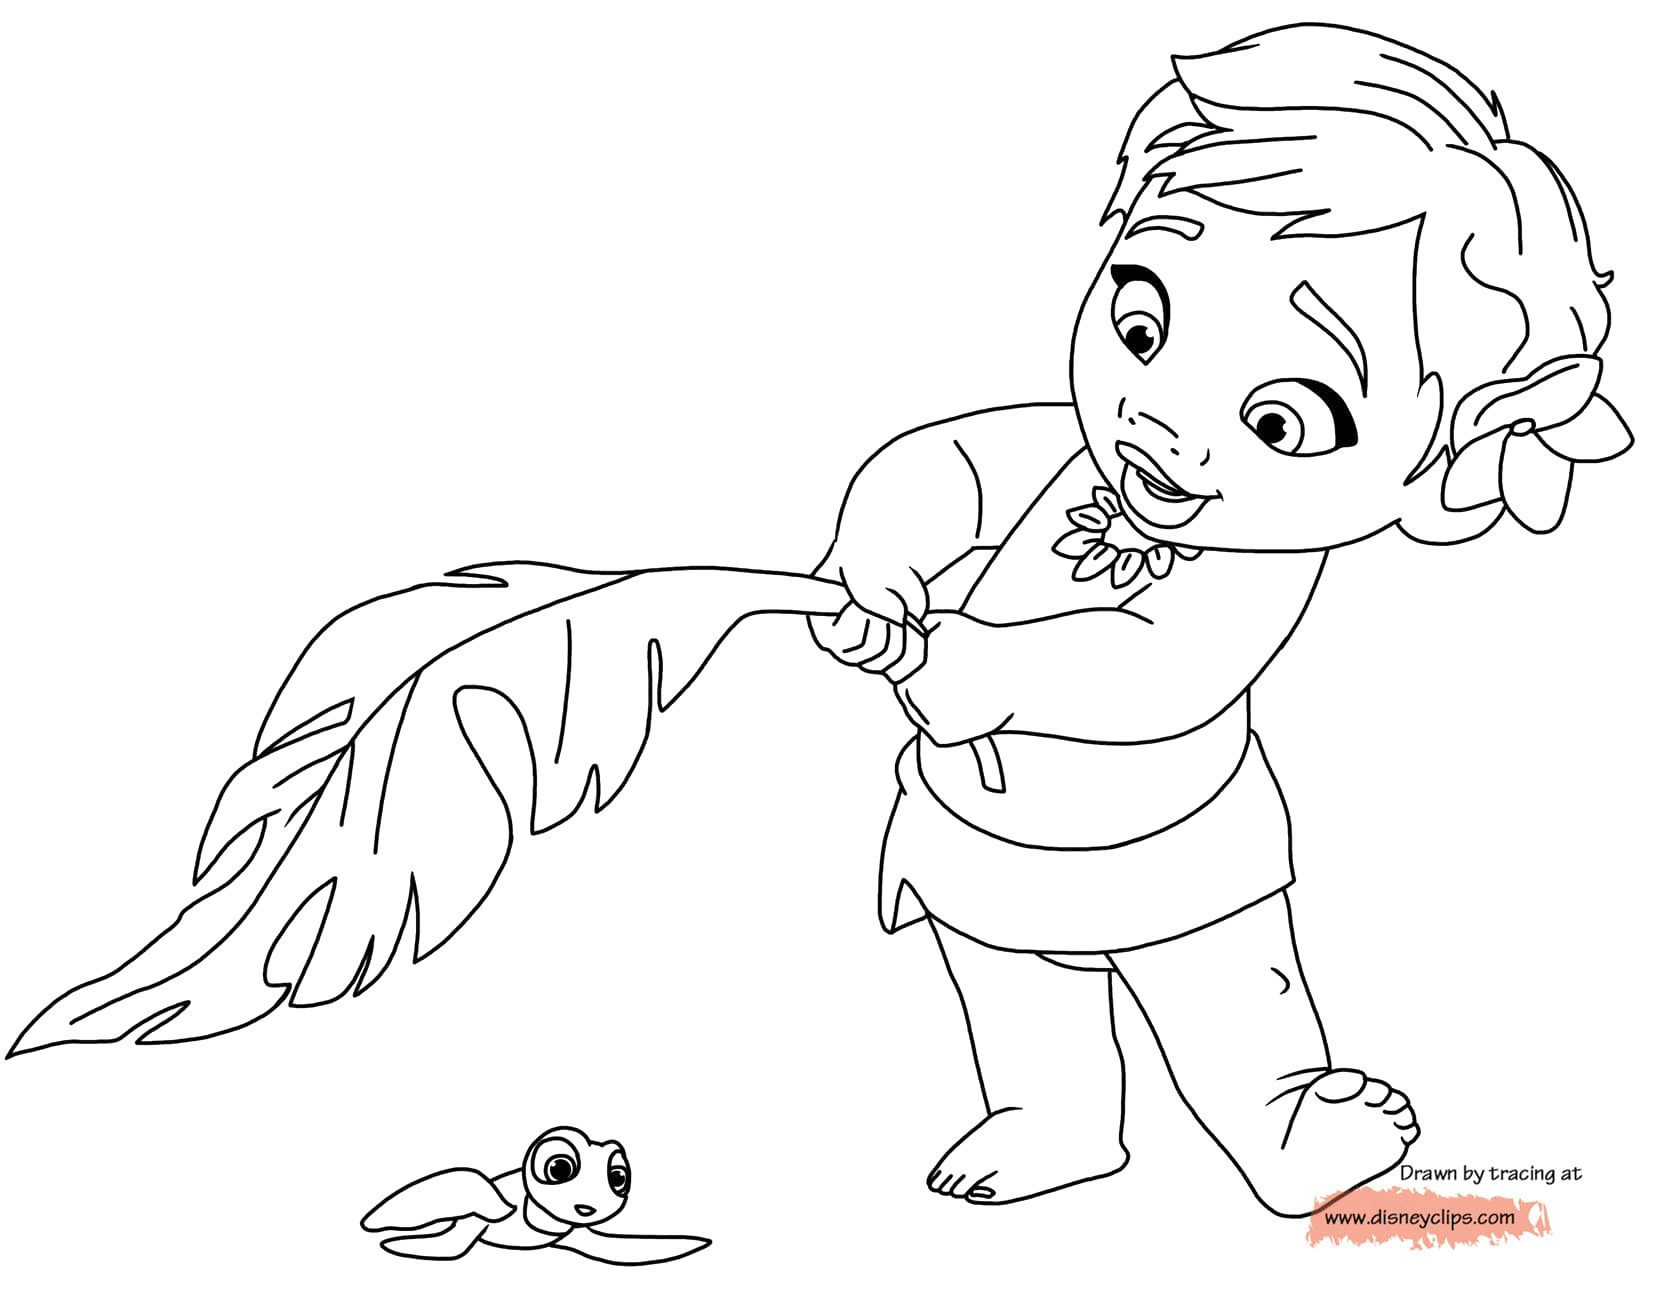 Moana Coloring Pages For Toddlers
 Disney s Moana Coloring Pages